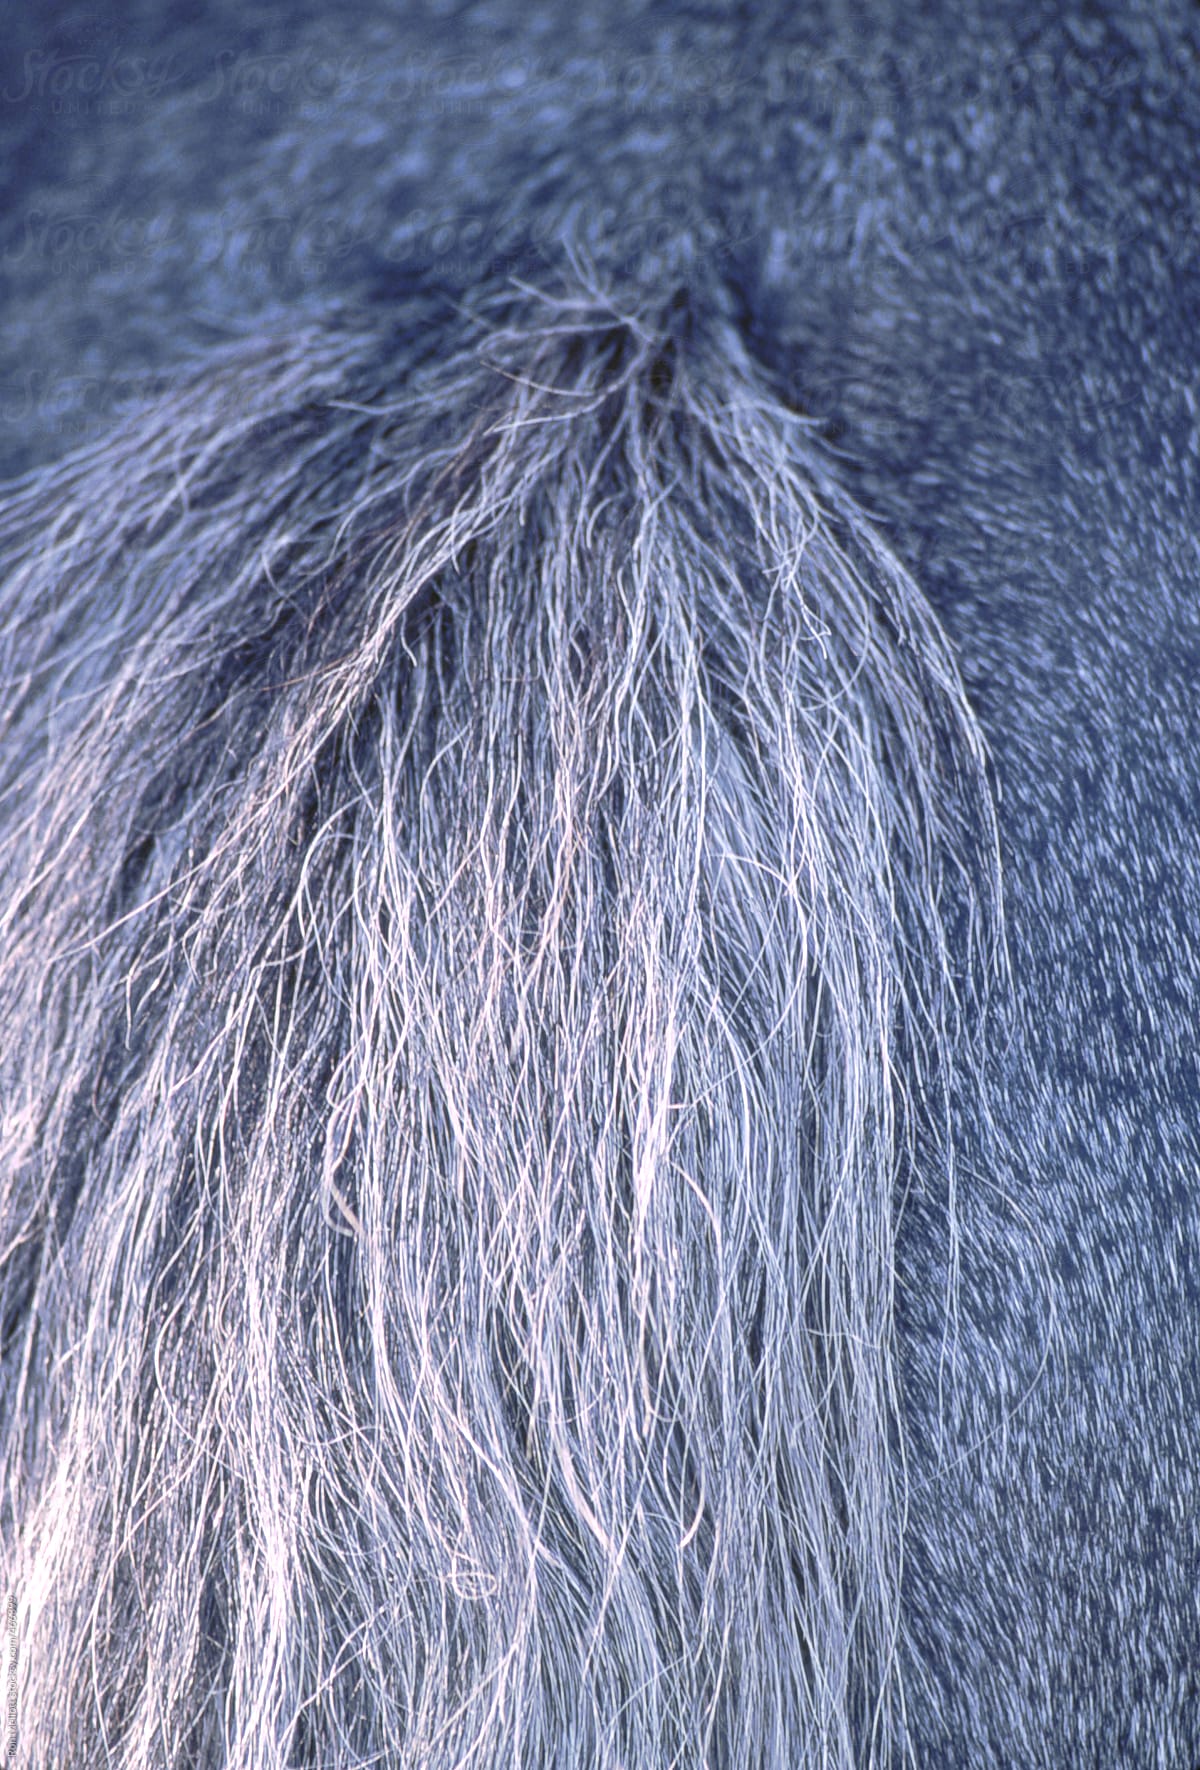 closeup telephoto of a horse tail in shadow